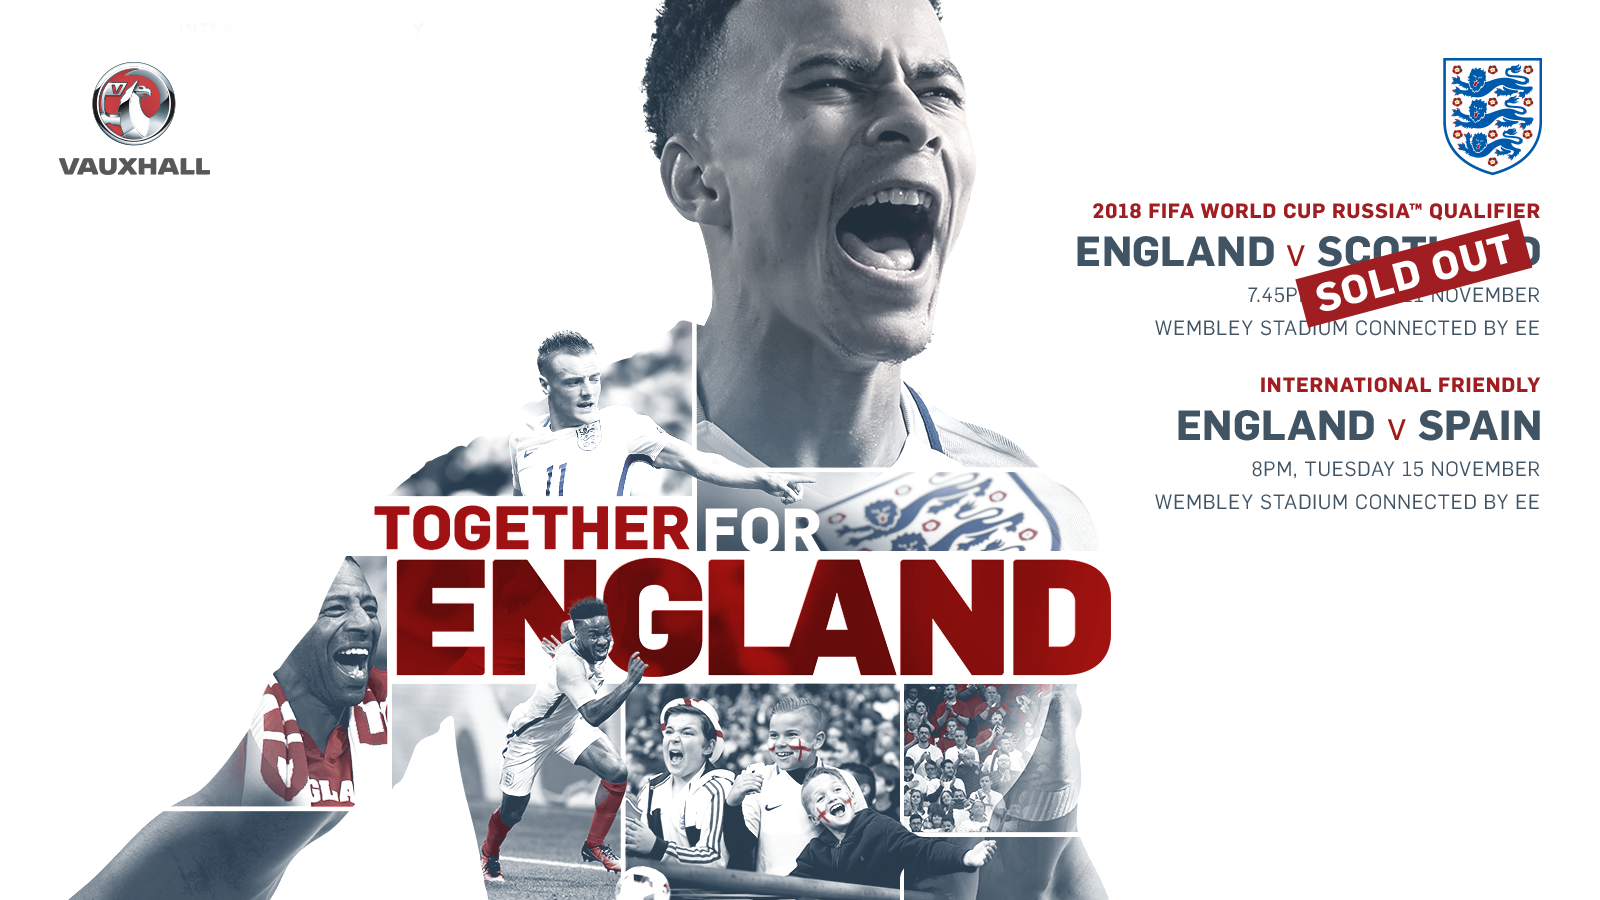 England v Scotland tickets sold out